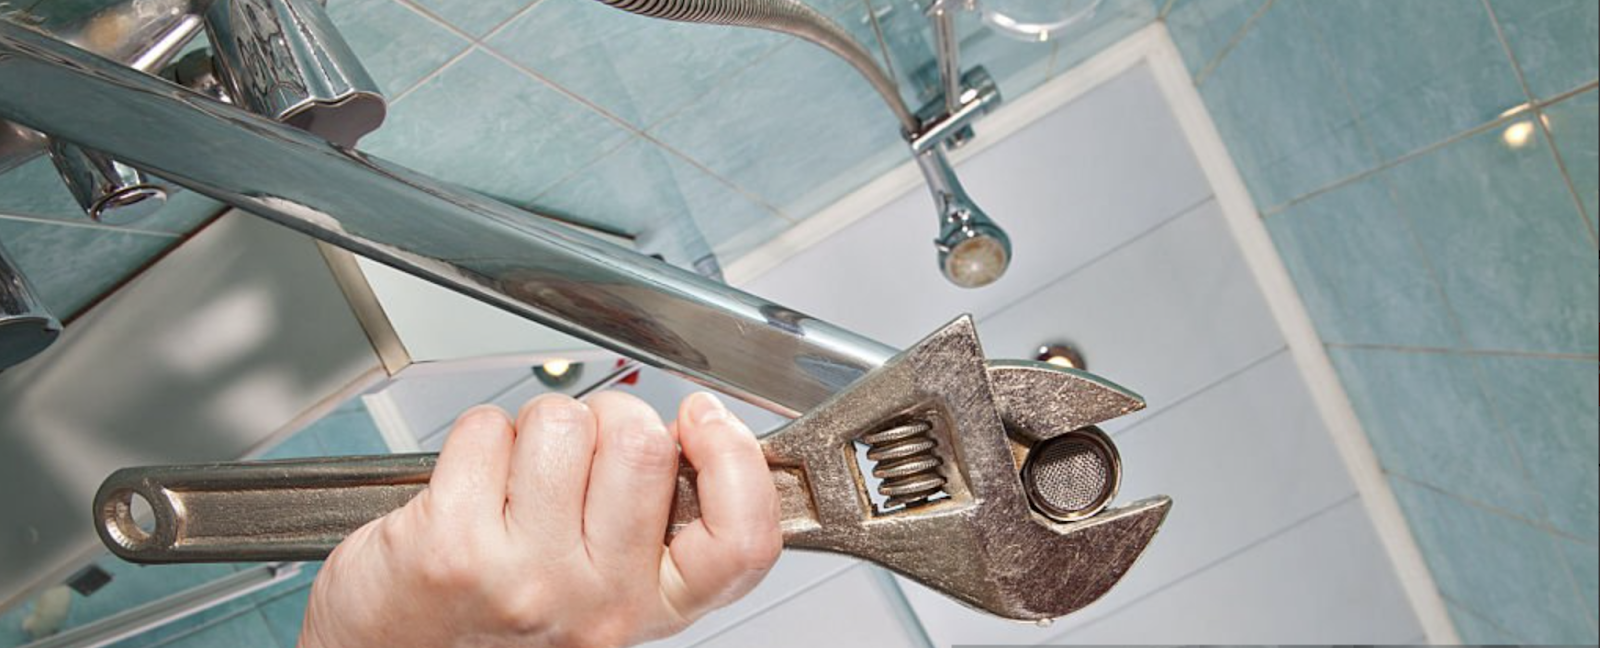 Troubleshooting Tips for Faulty Sink Faucet